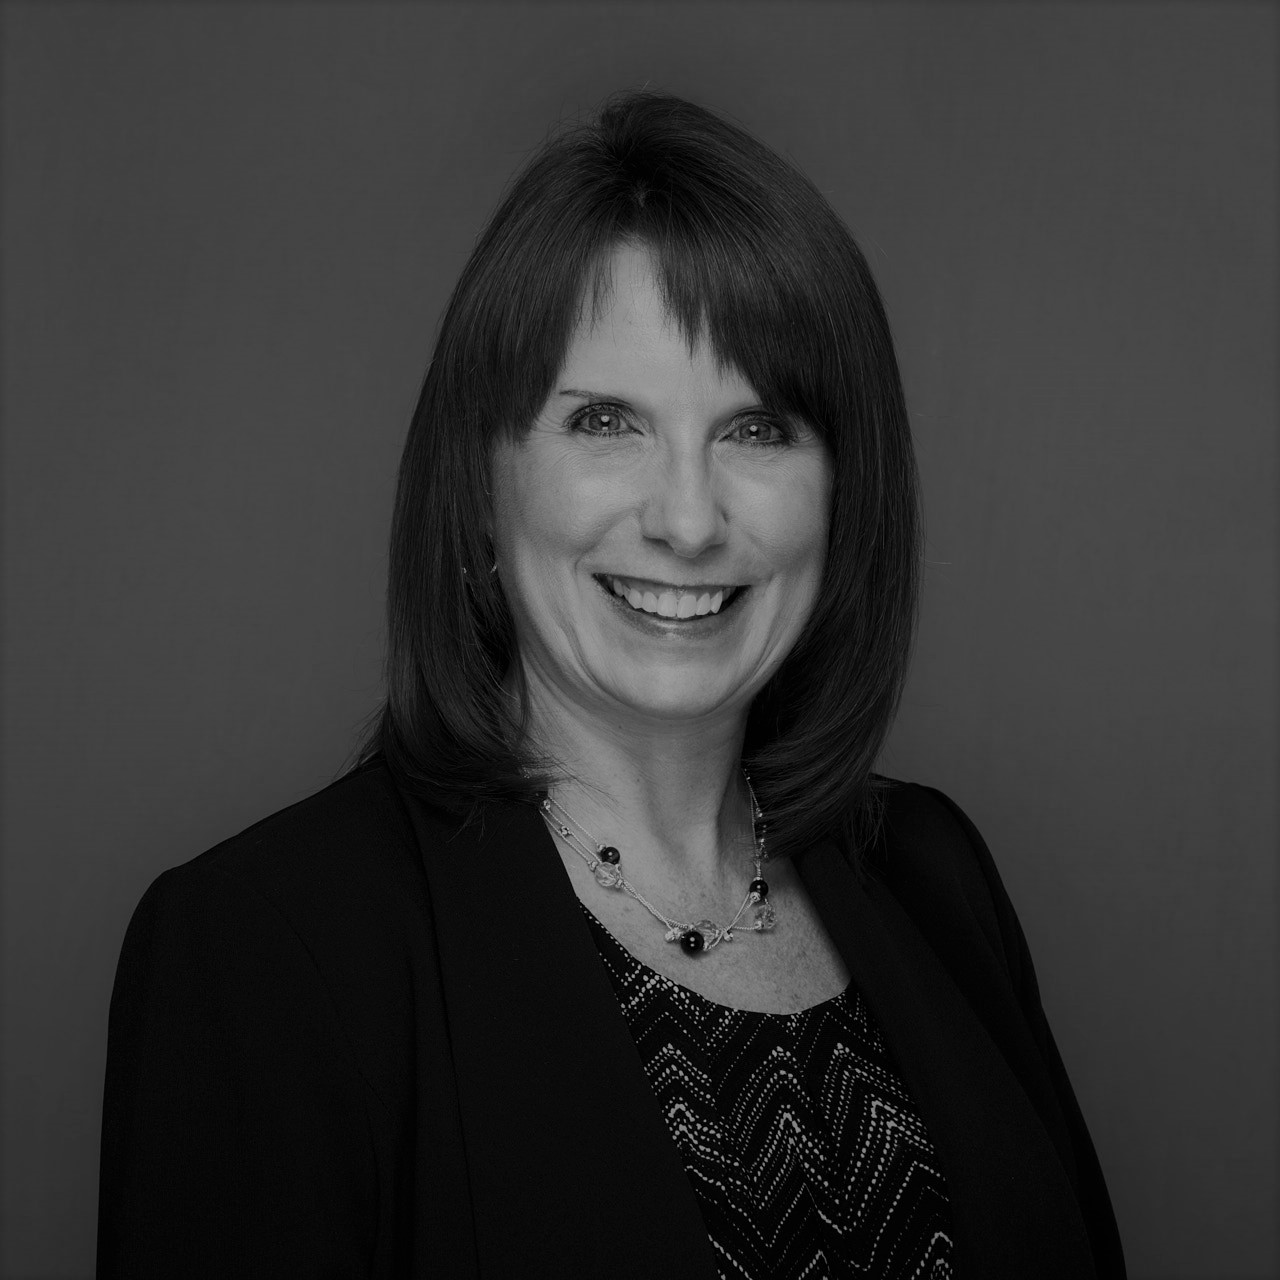 image: a black and white headshot of a woman in business attire looking at the camera